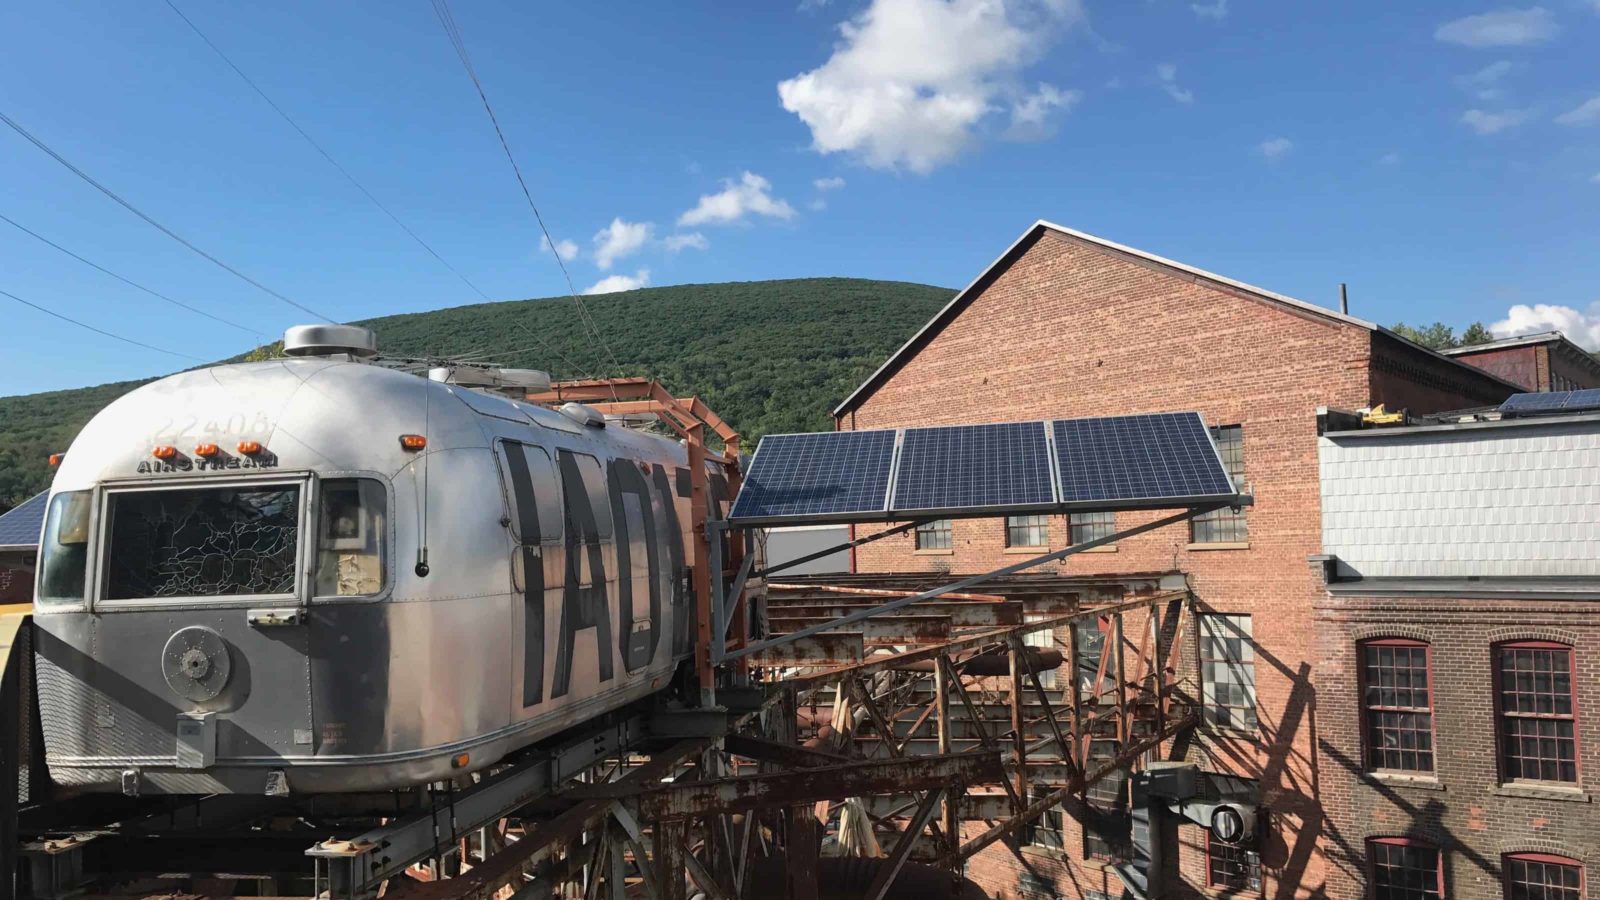 'The Shining,' Michael Oatman's silver Airstream vintage space ship, sits on the roof at Mass MoCA.